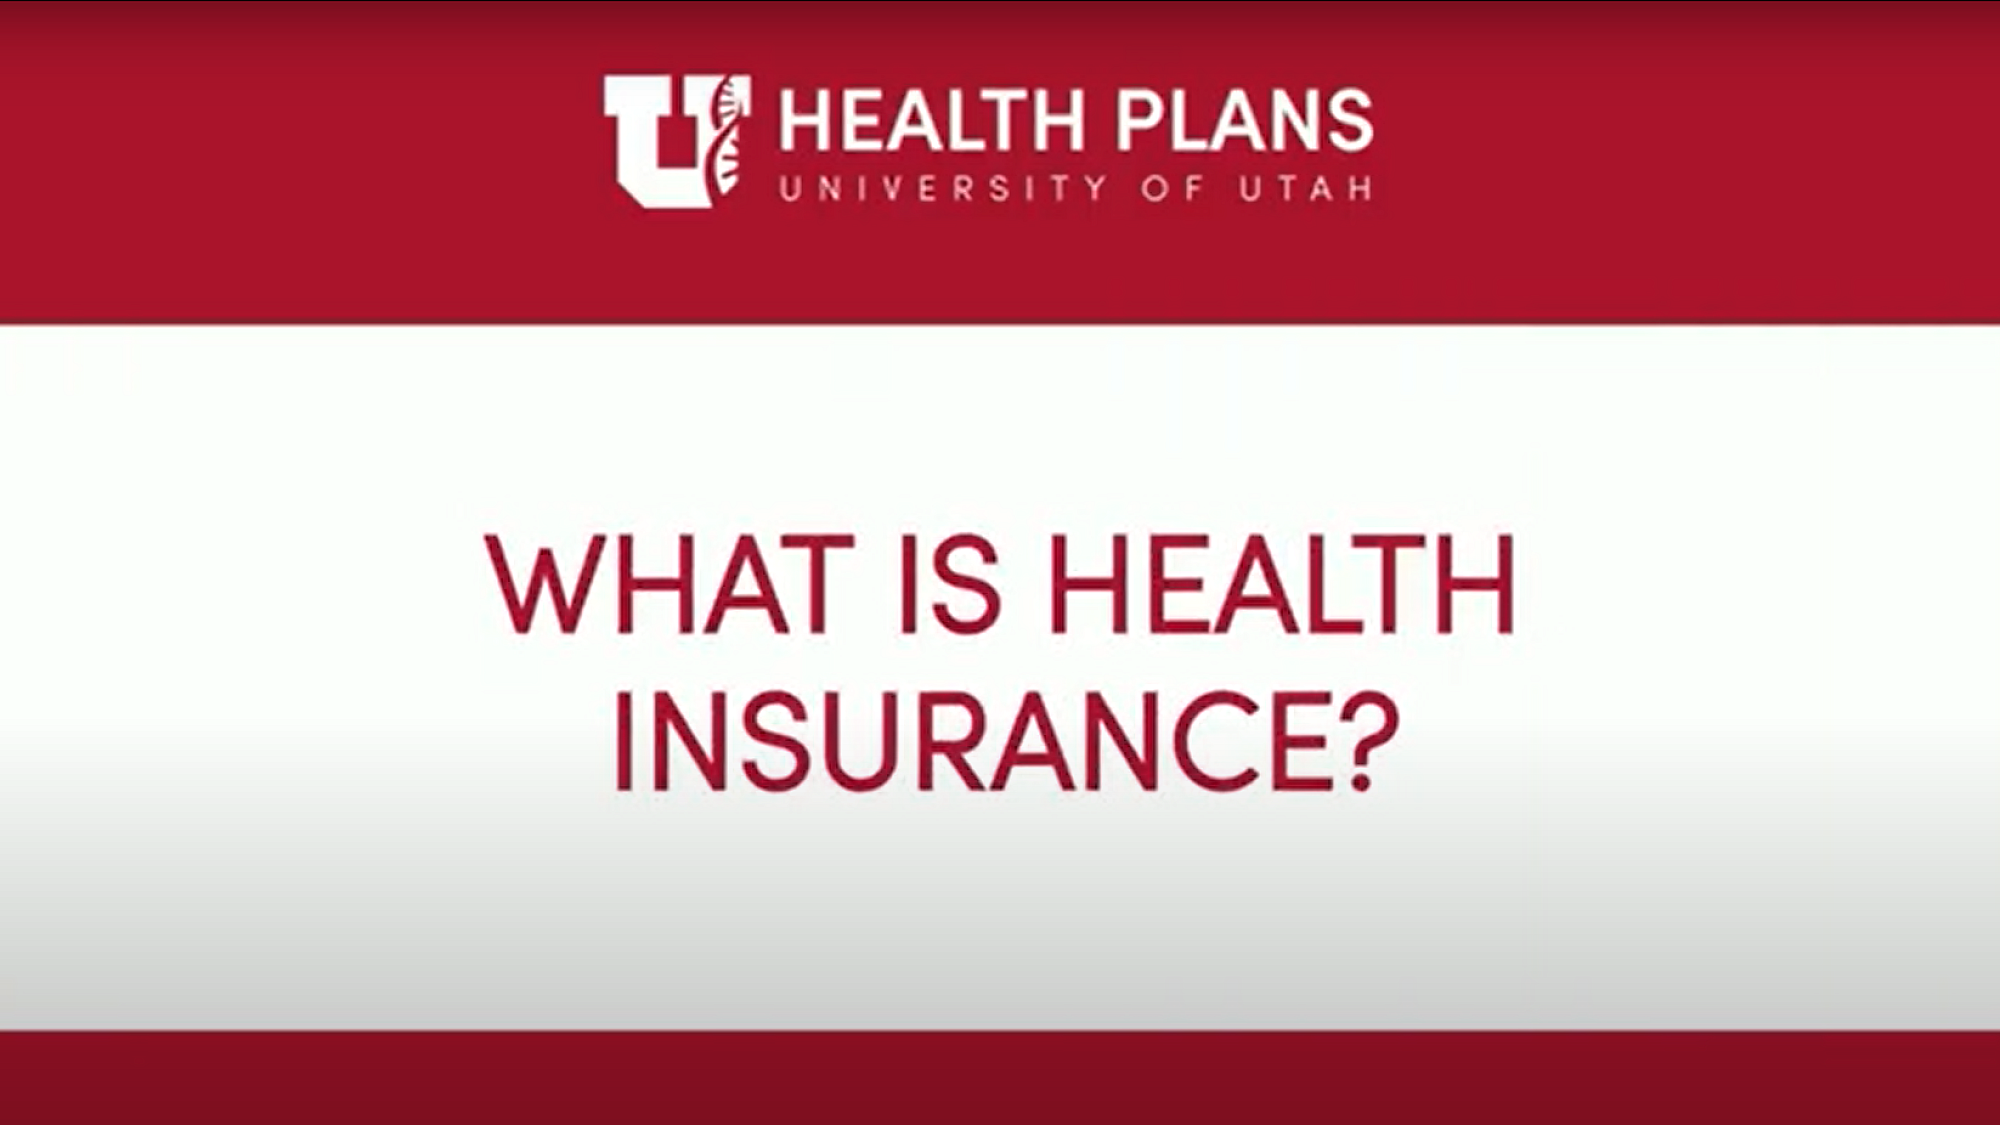 Picture of first image in health insurance video